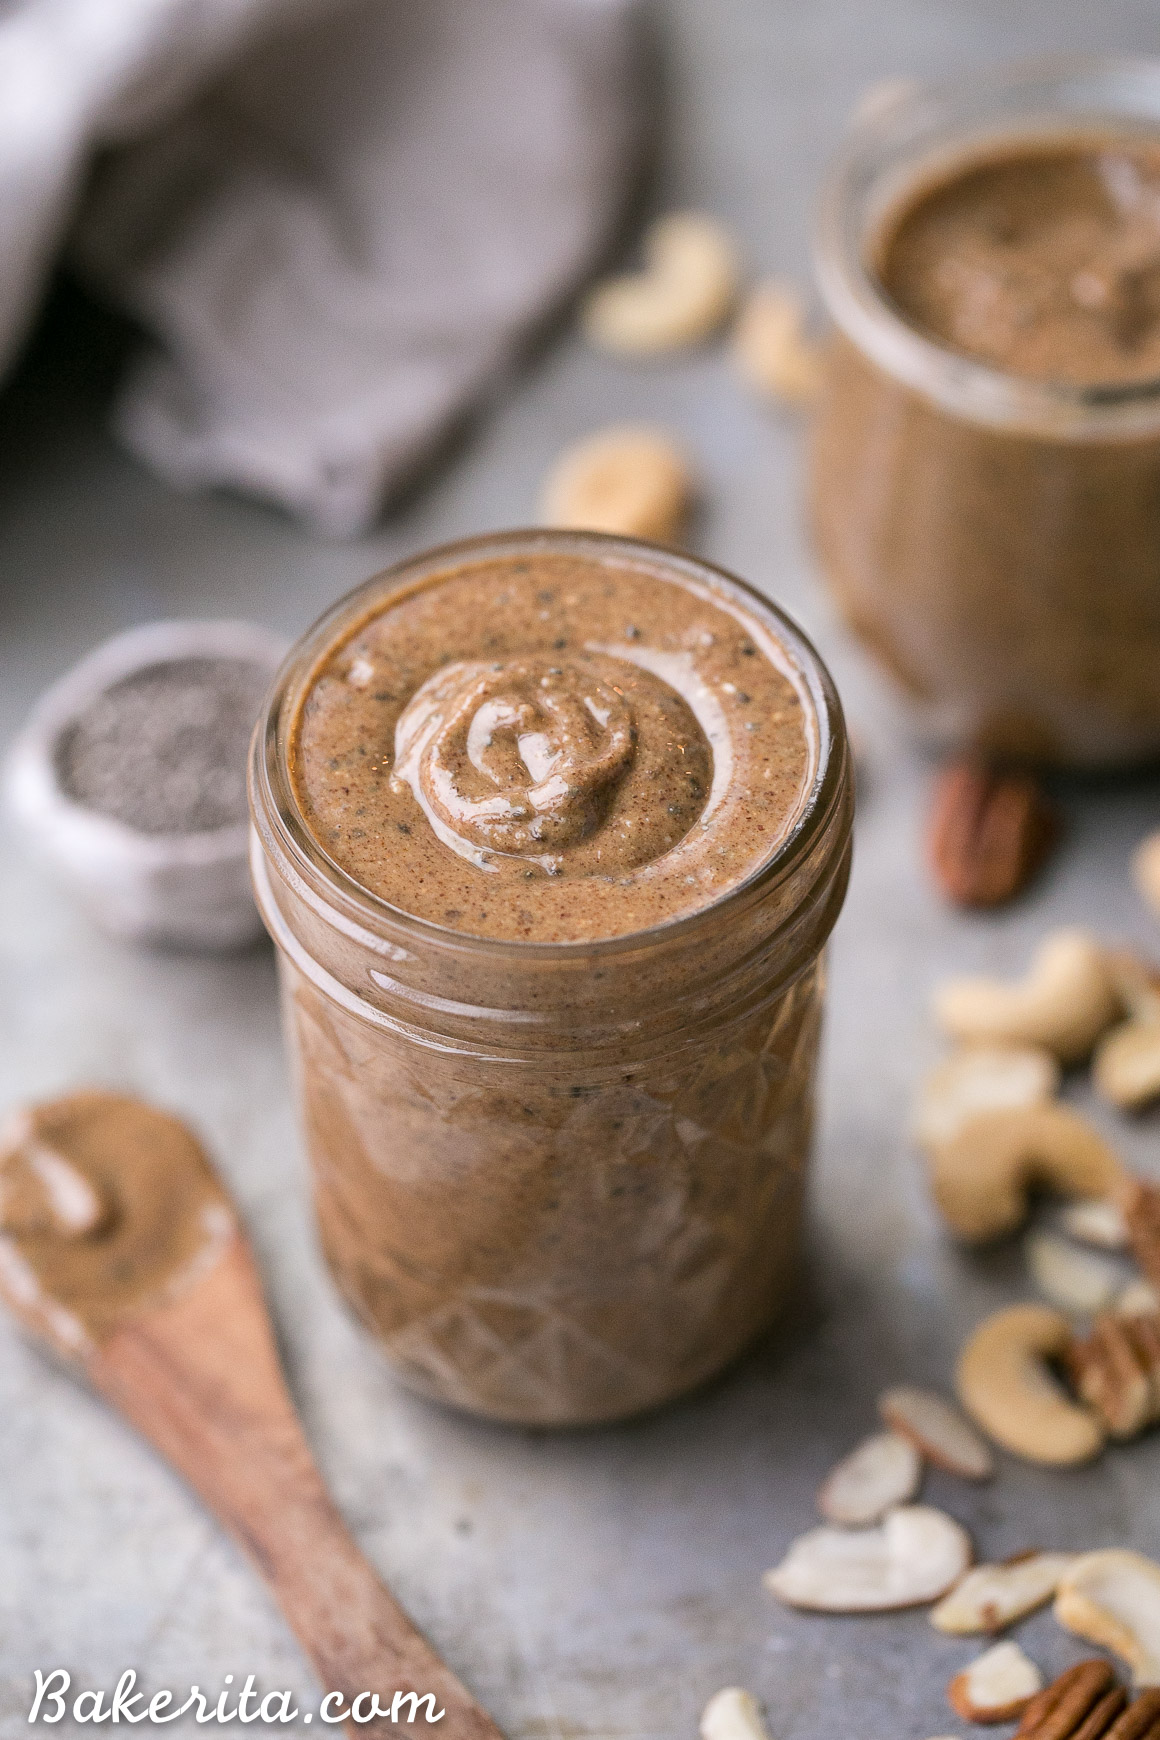 This Super Seed Nut Butter is made with a variety of nuts and seeds, creating a smooth and creamy spread that's super flavorful and loaded with nutrients. This delicious homemade nut + seed butter comes together quickly in a blender or food processor.